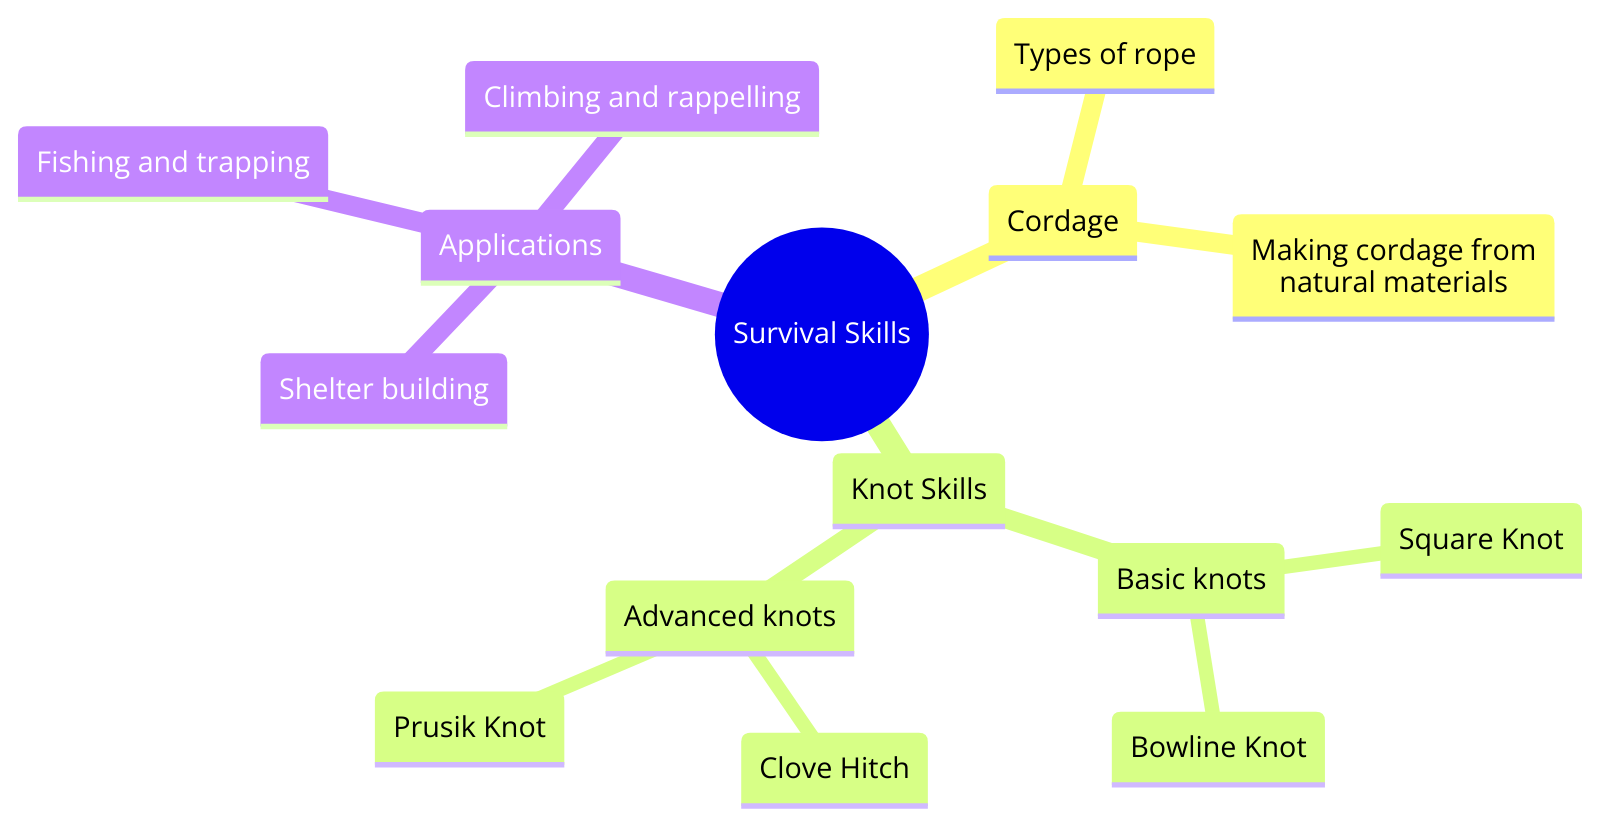  survival skills with a focus on cordage and knot skills